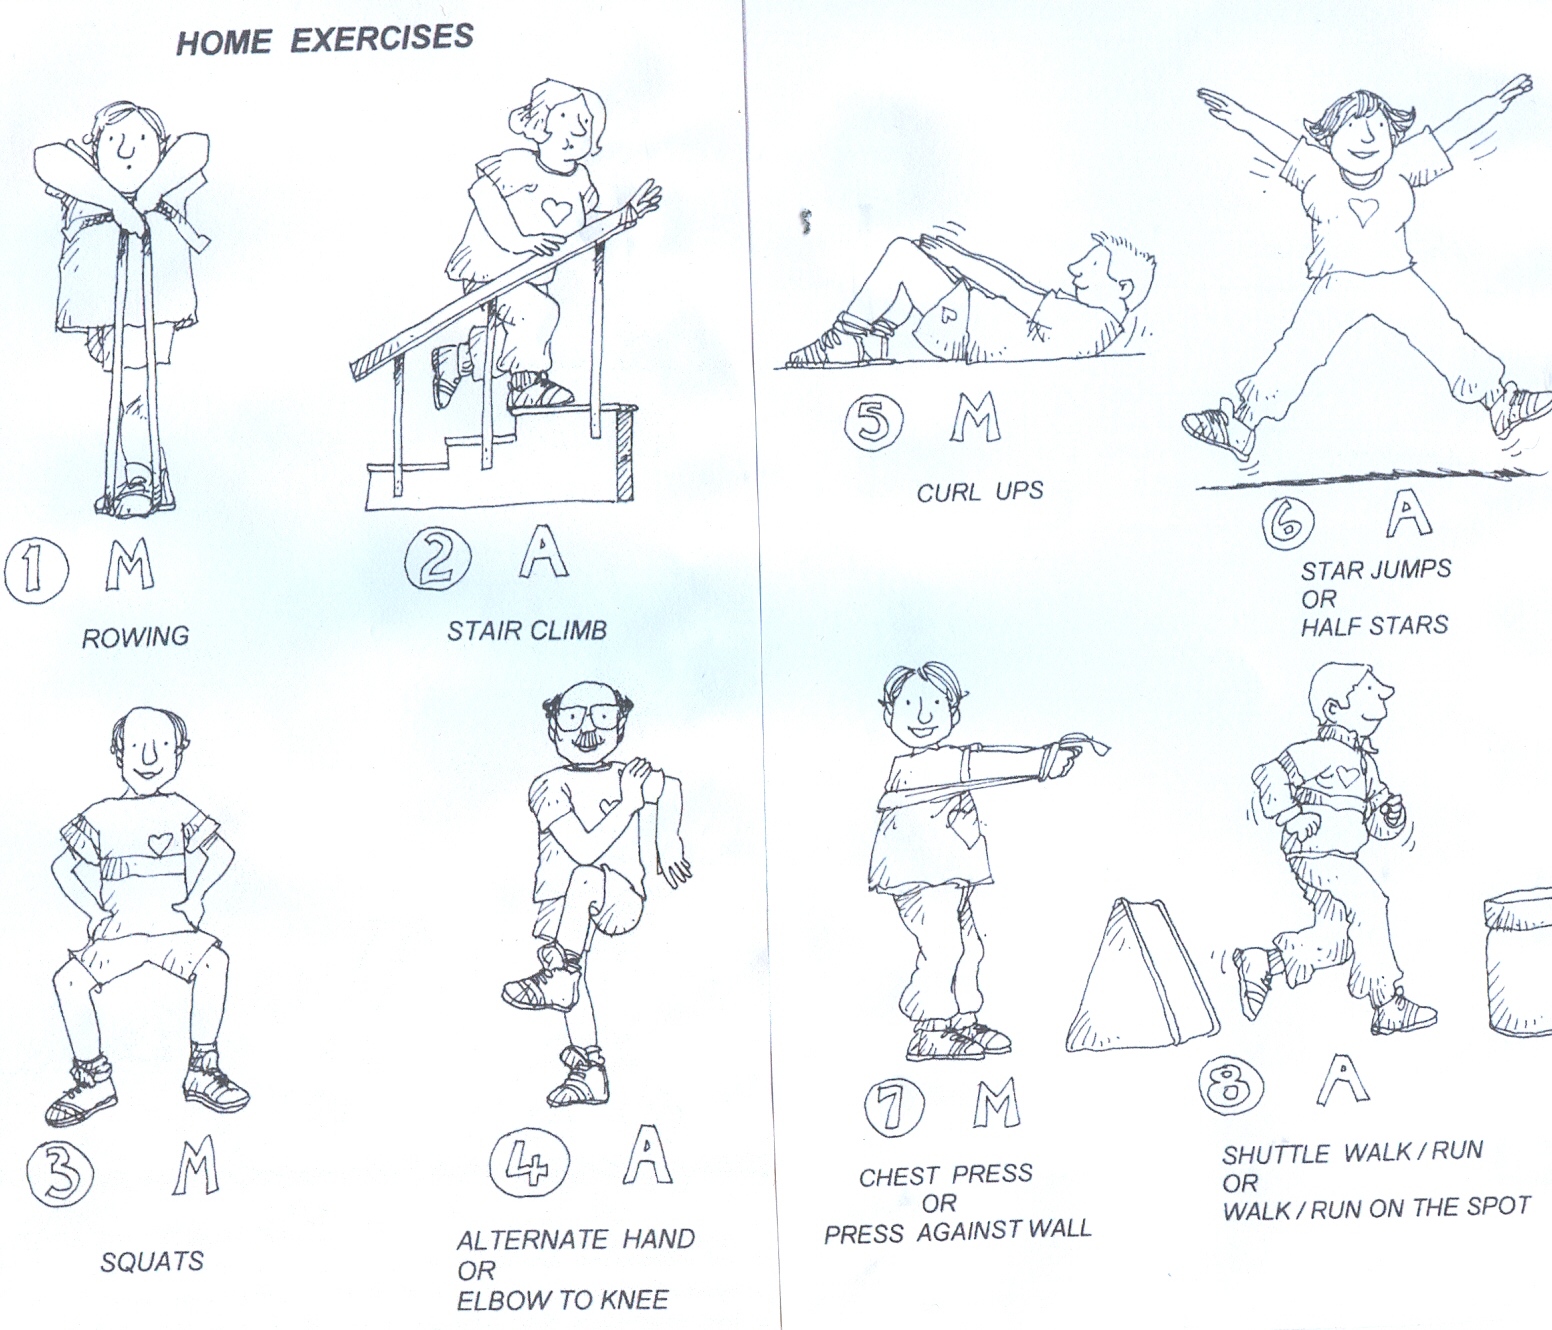 An image of WHAT TYPE OF EXERCISE?